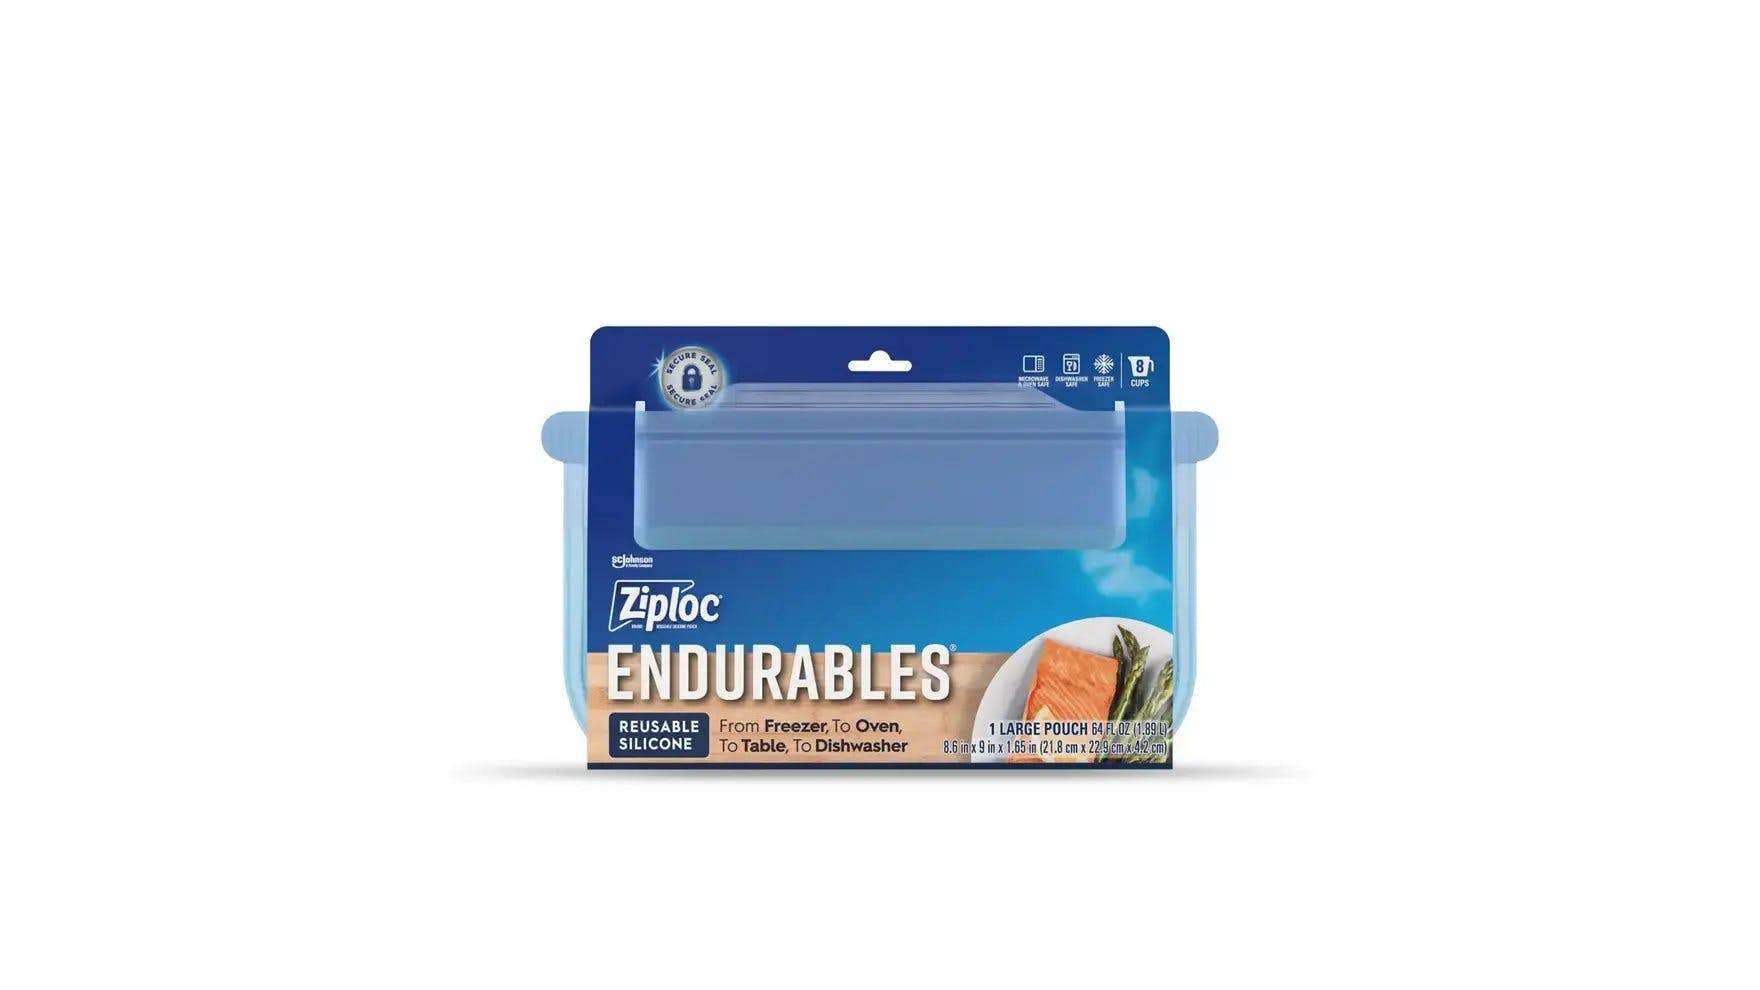  Ziploc Endurables Small Container, 2 Cups, Reusable Silicone  Bags and Food Storage Meal Prep Containers for Freezer, Oven, and  Microwave, Dishwasher Safe, 2 Pack : Home & Kitchen